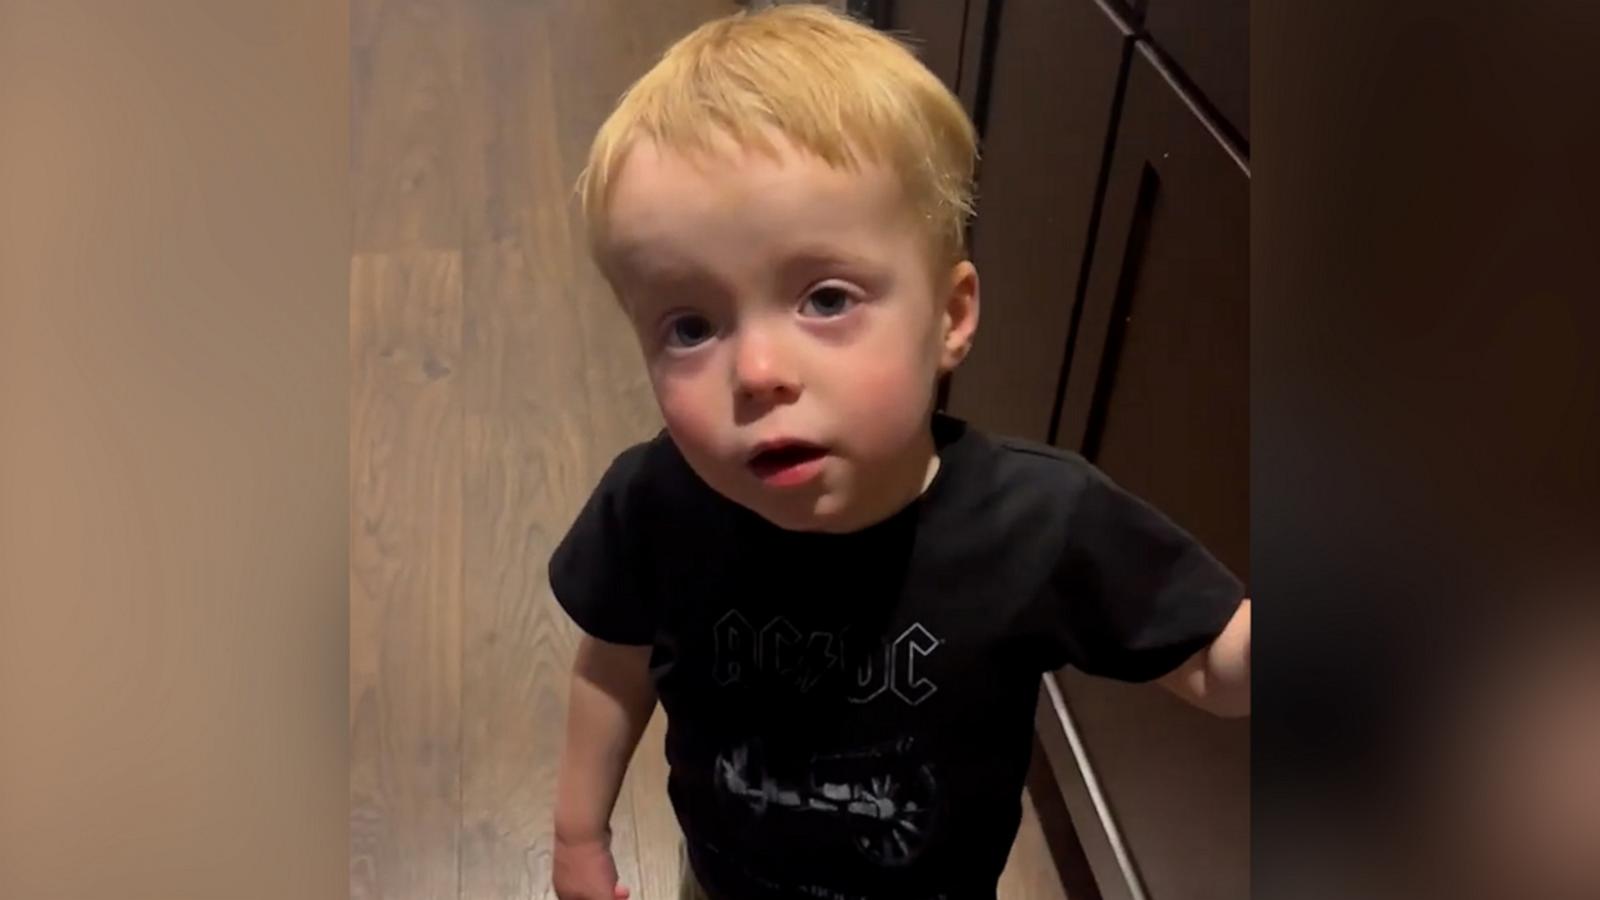 VIDEO: Toddler tries his very best to whistle tune of 'Baby Shark'